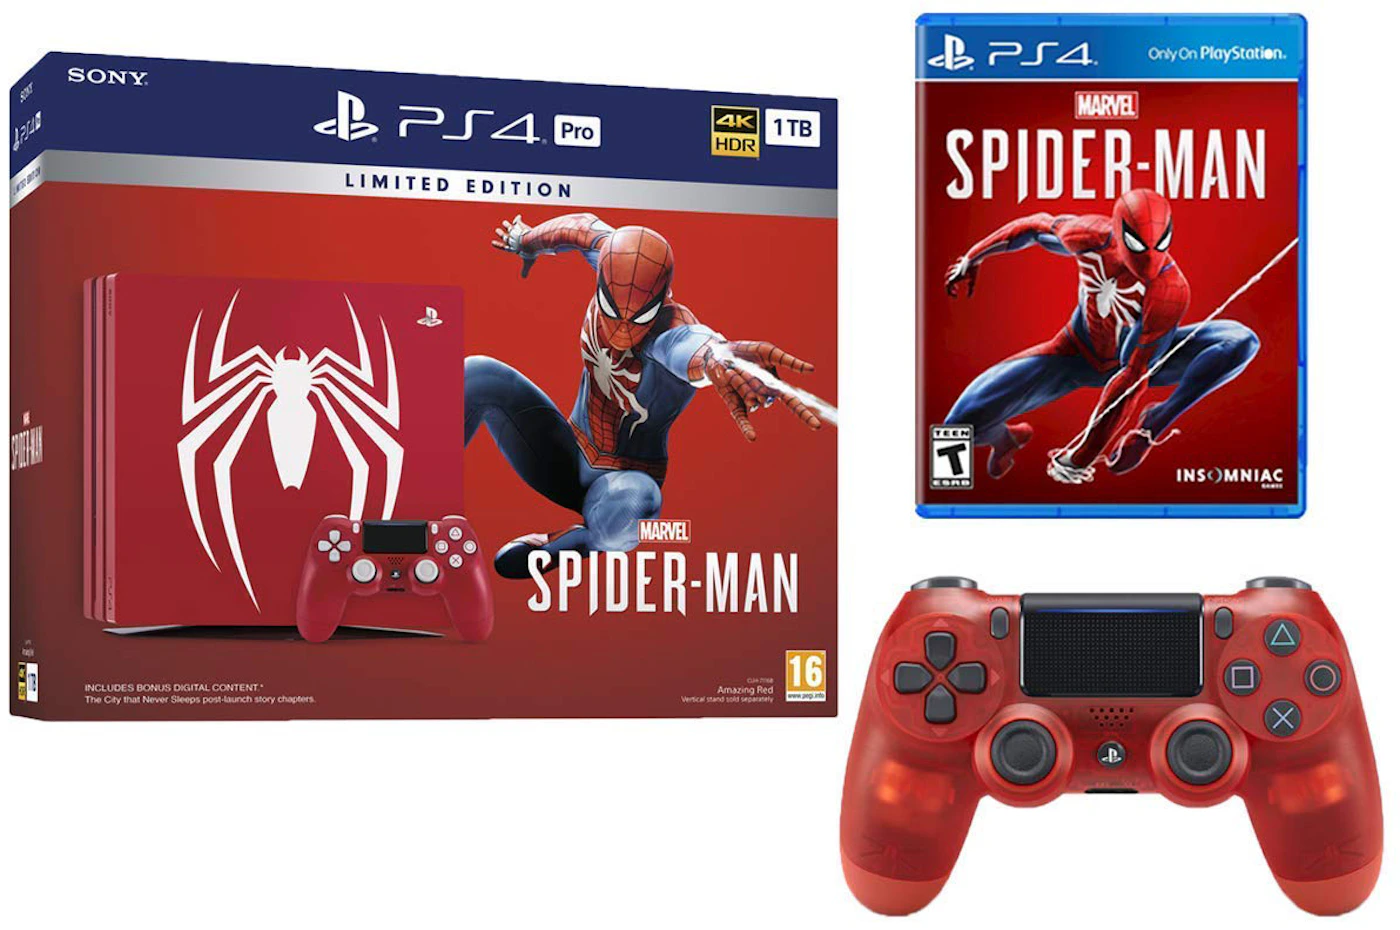 Restored Sony 1TB PlayStation 4 Pro Marvel's Spider-Man Console Limited  Edition - Red 3003194 (Refurbished)